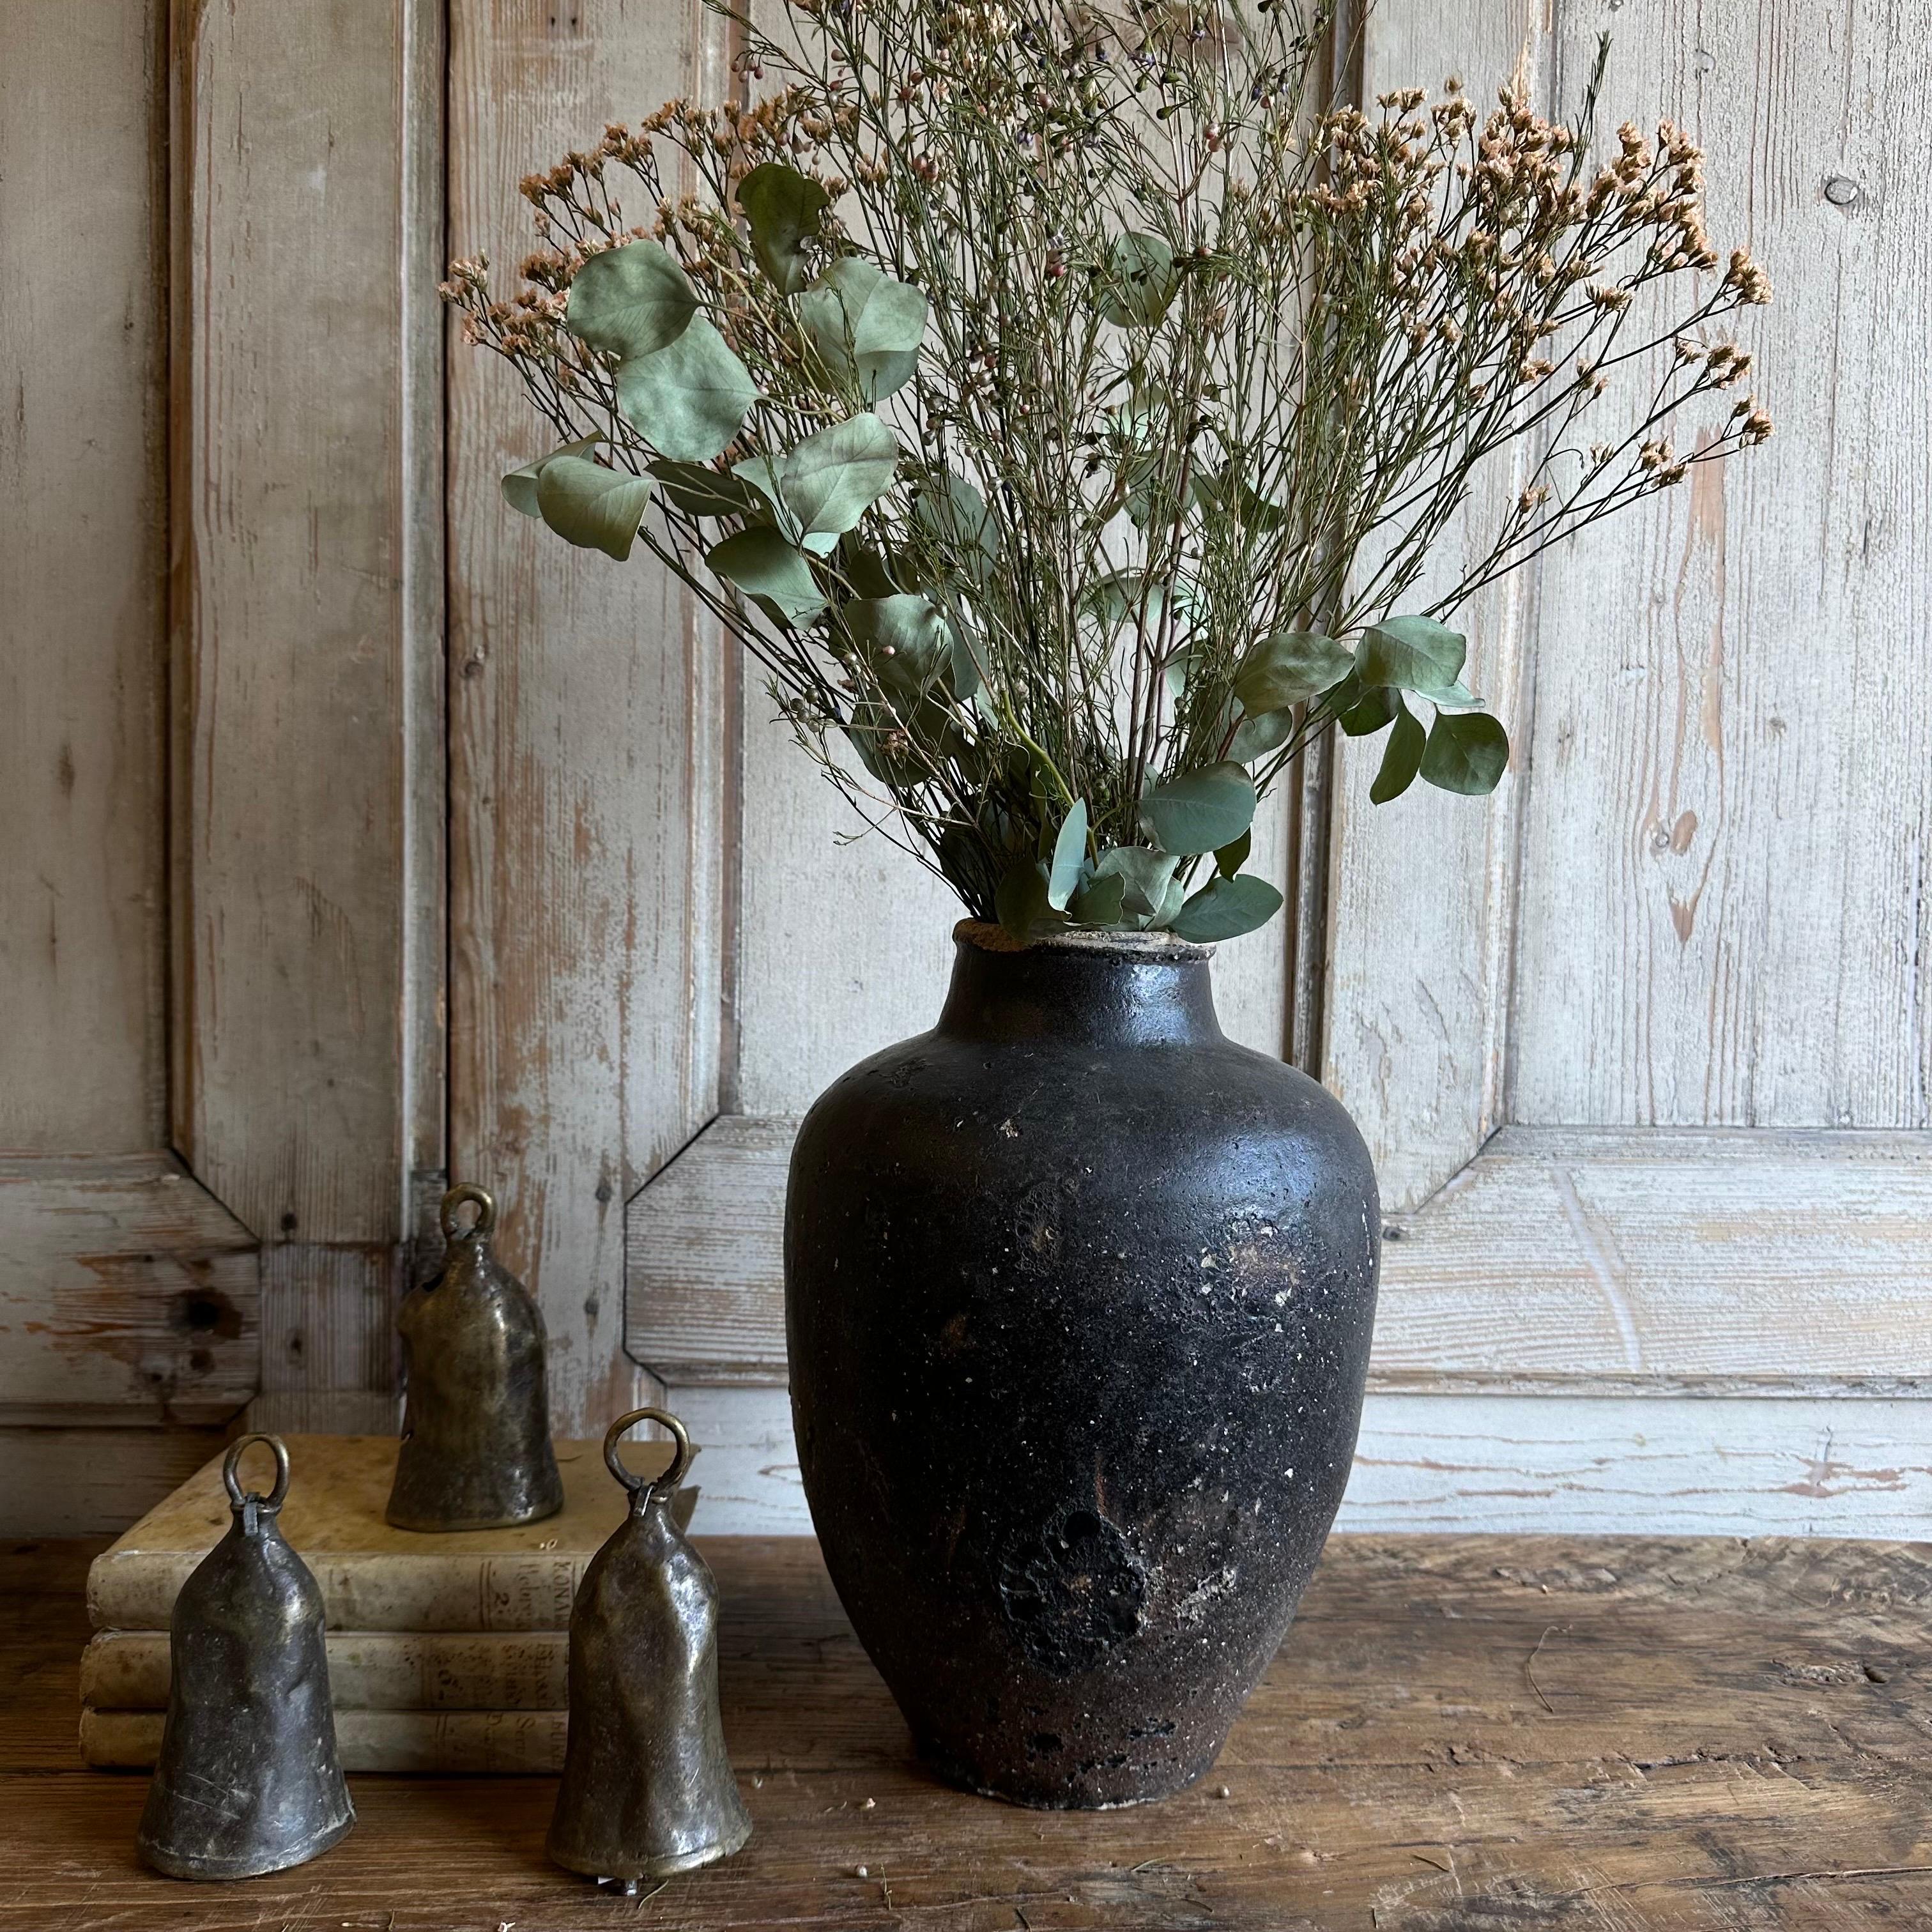 Vintage glazed pottery rich in character, this vintage oil pot adds just the right amount of texture + warmth where you need it. Stunning matte finish with dark gray brown muddy hues, with a washed antique look. Each piece is uniquely special with